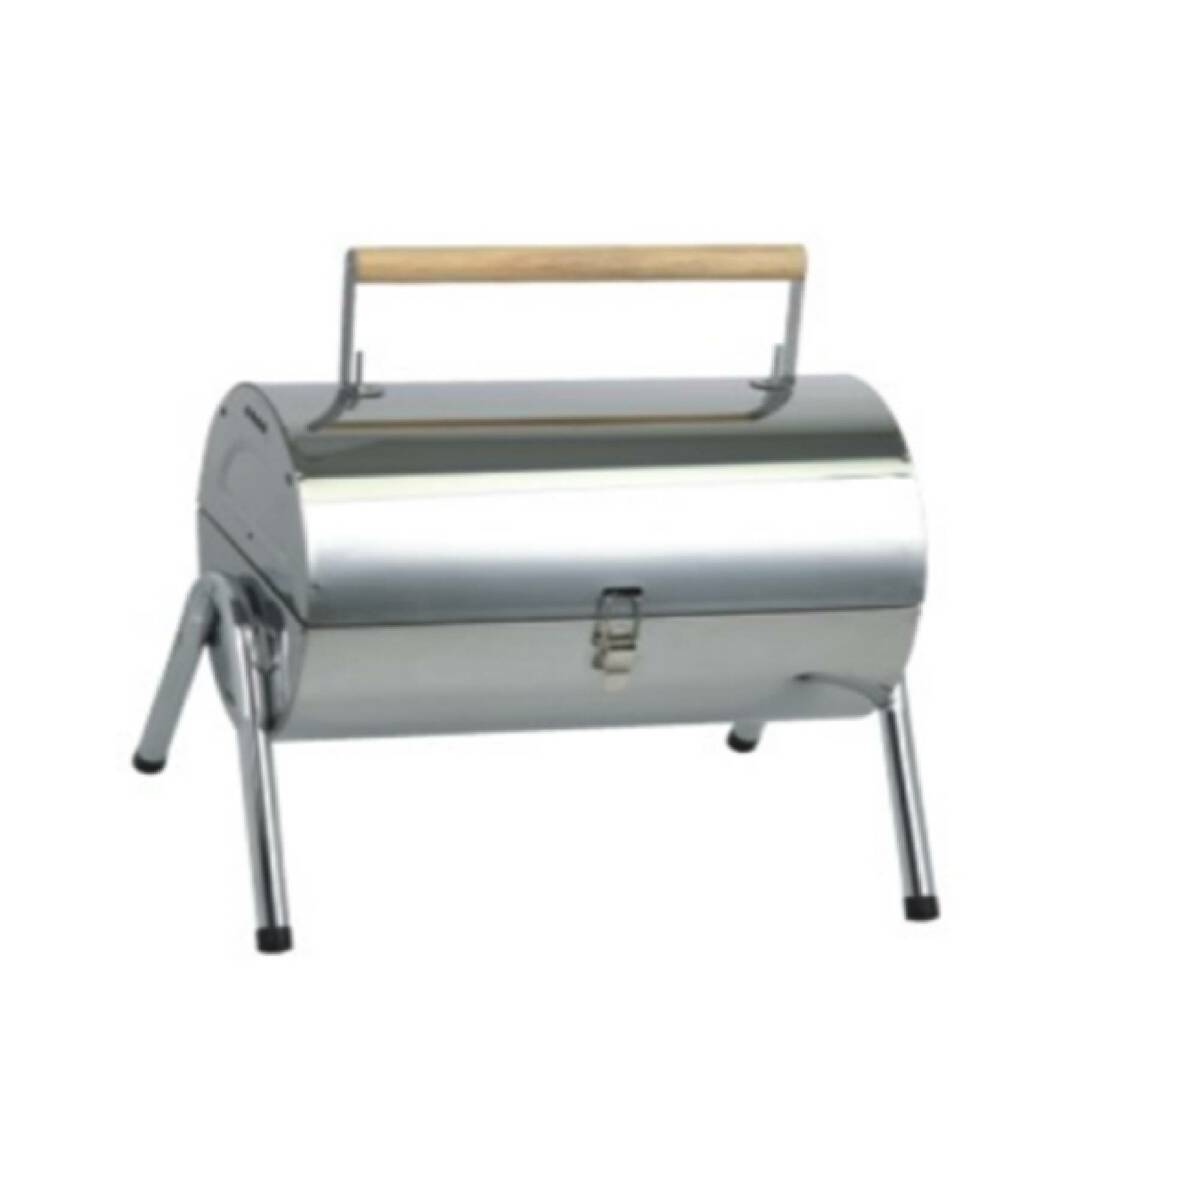 Relax BBQ Grill YH28014A 22cm